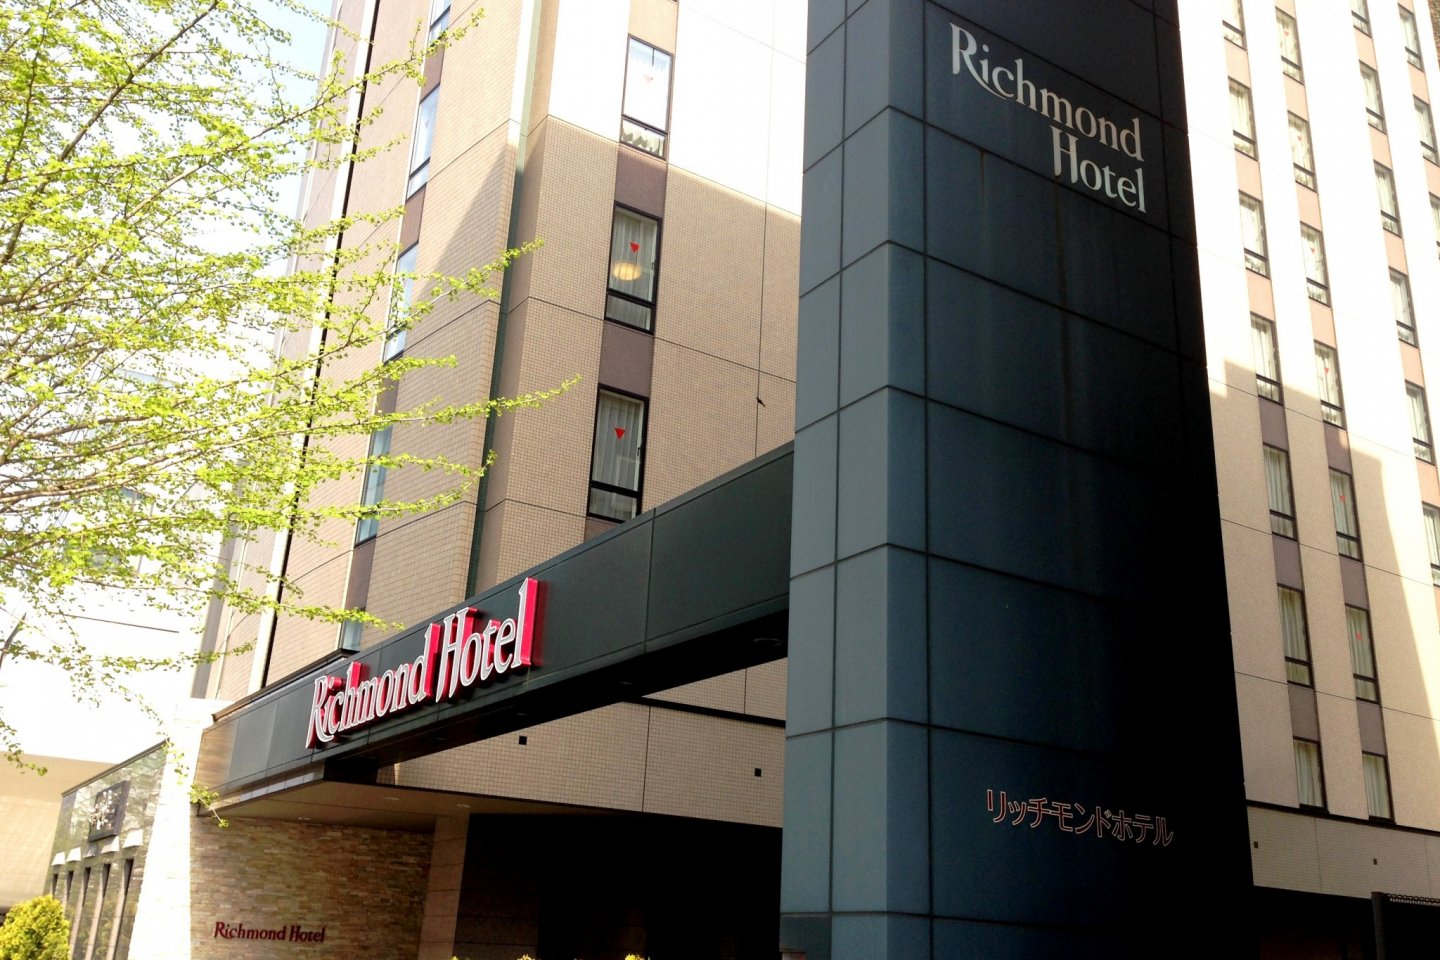 Richmond hotel is one of the top rated hotels with Akita and has the chic factor more commonly associated with four star hotels.